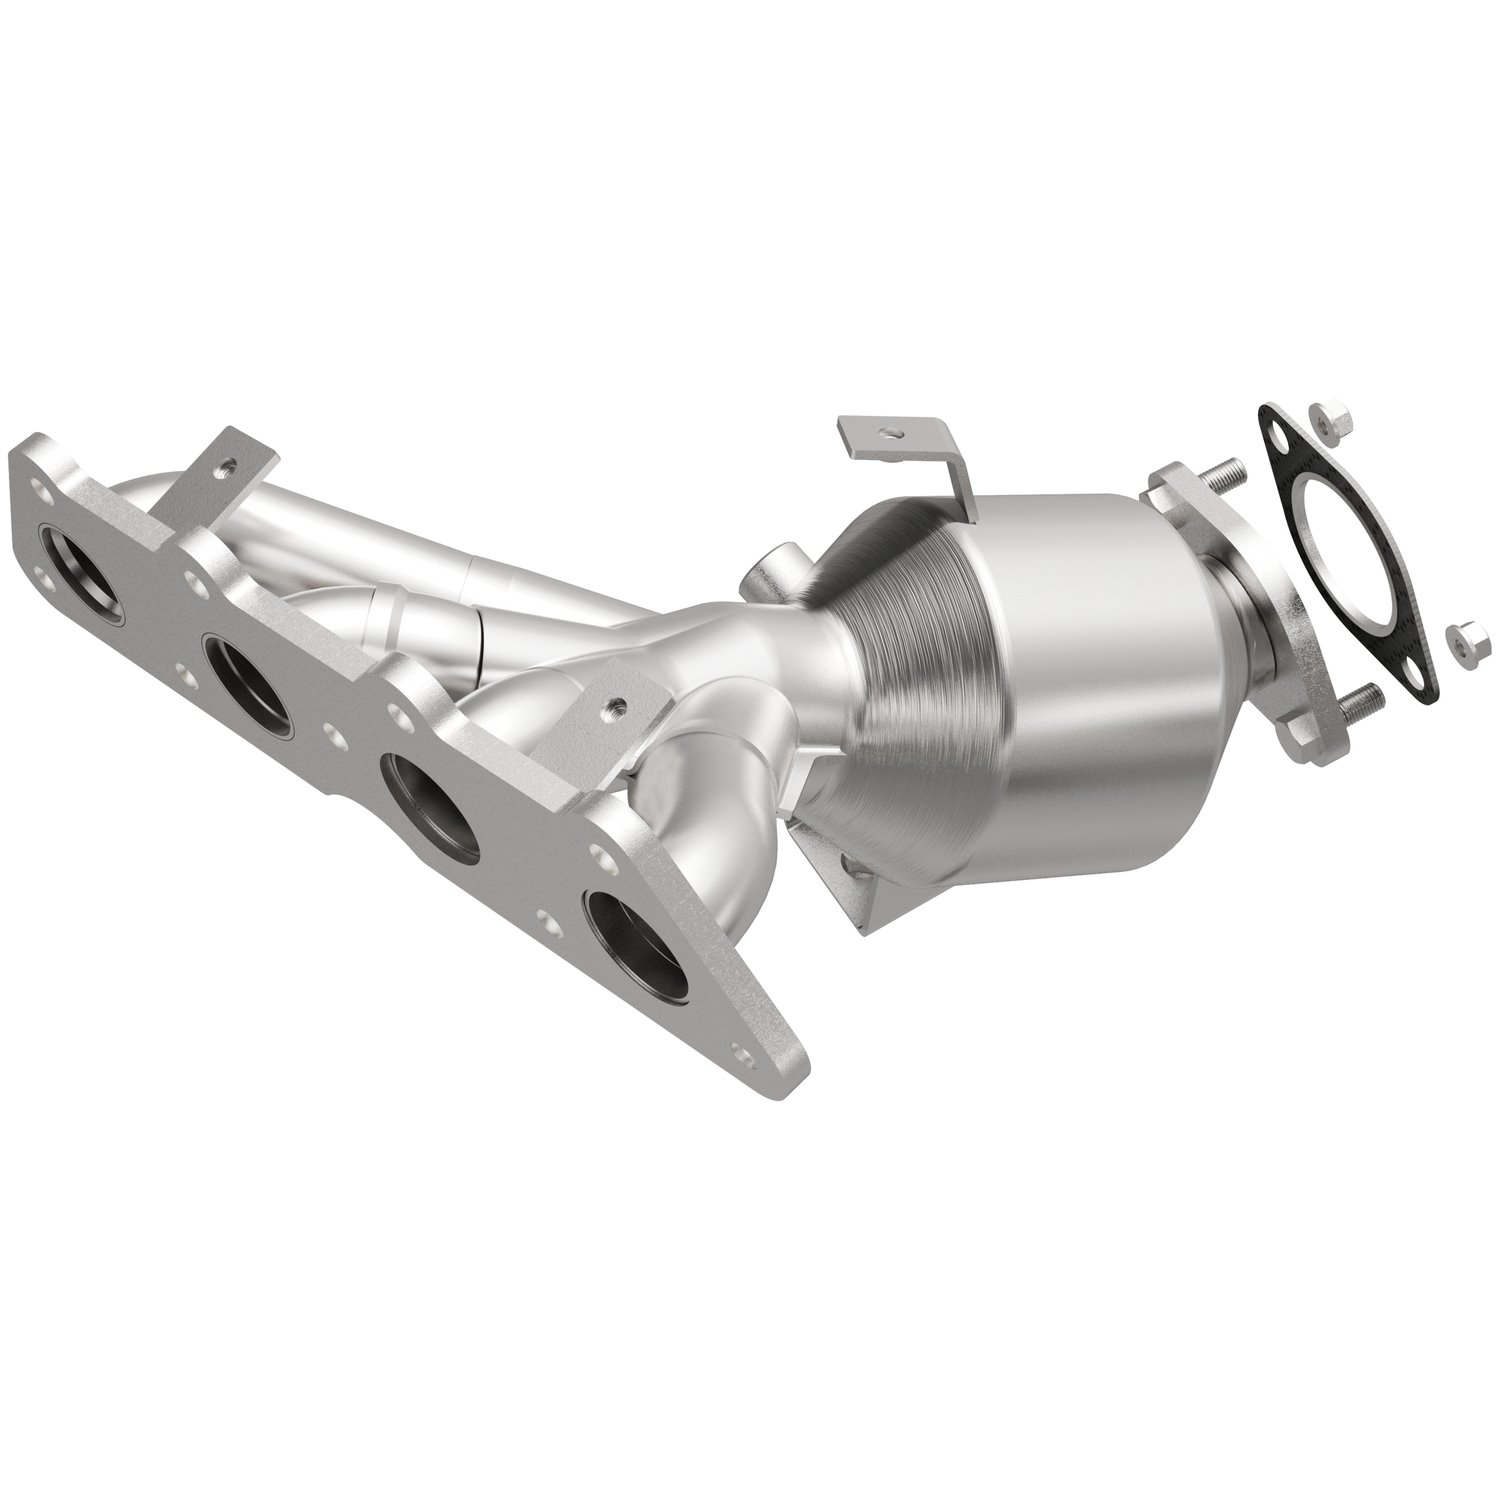 OEM Grade Federal / EPA Compliant Direct-Fit Catalytic Converter 23-113